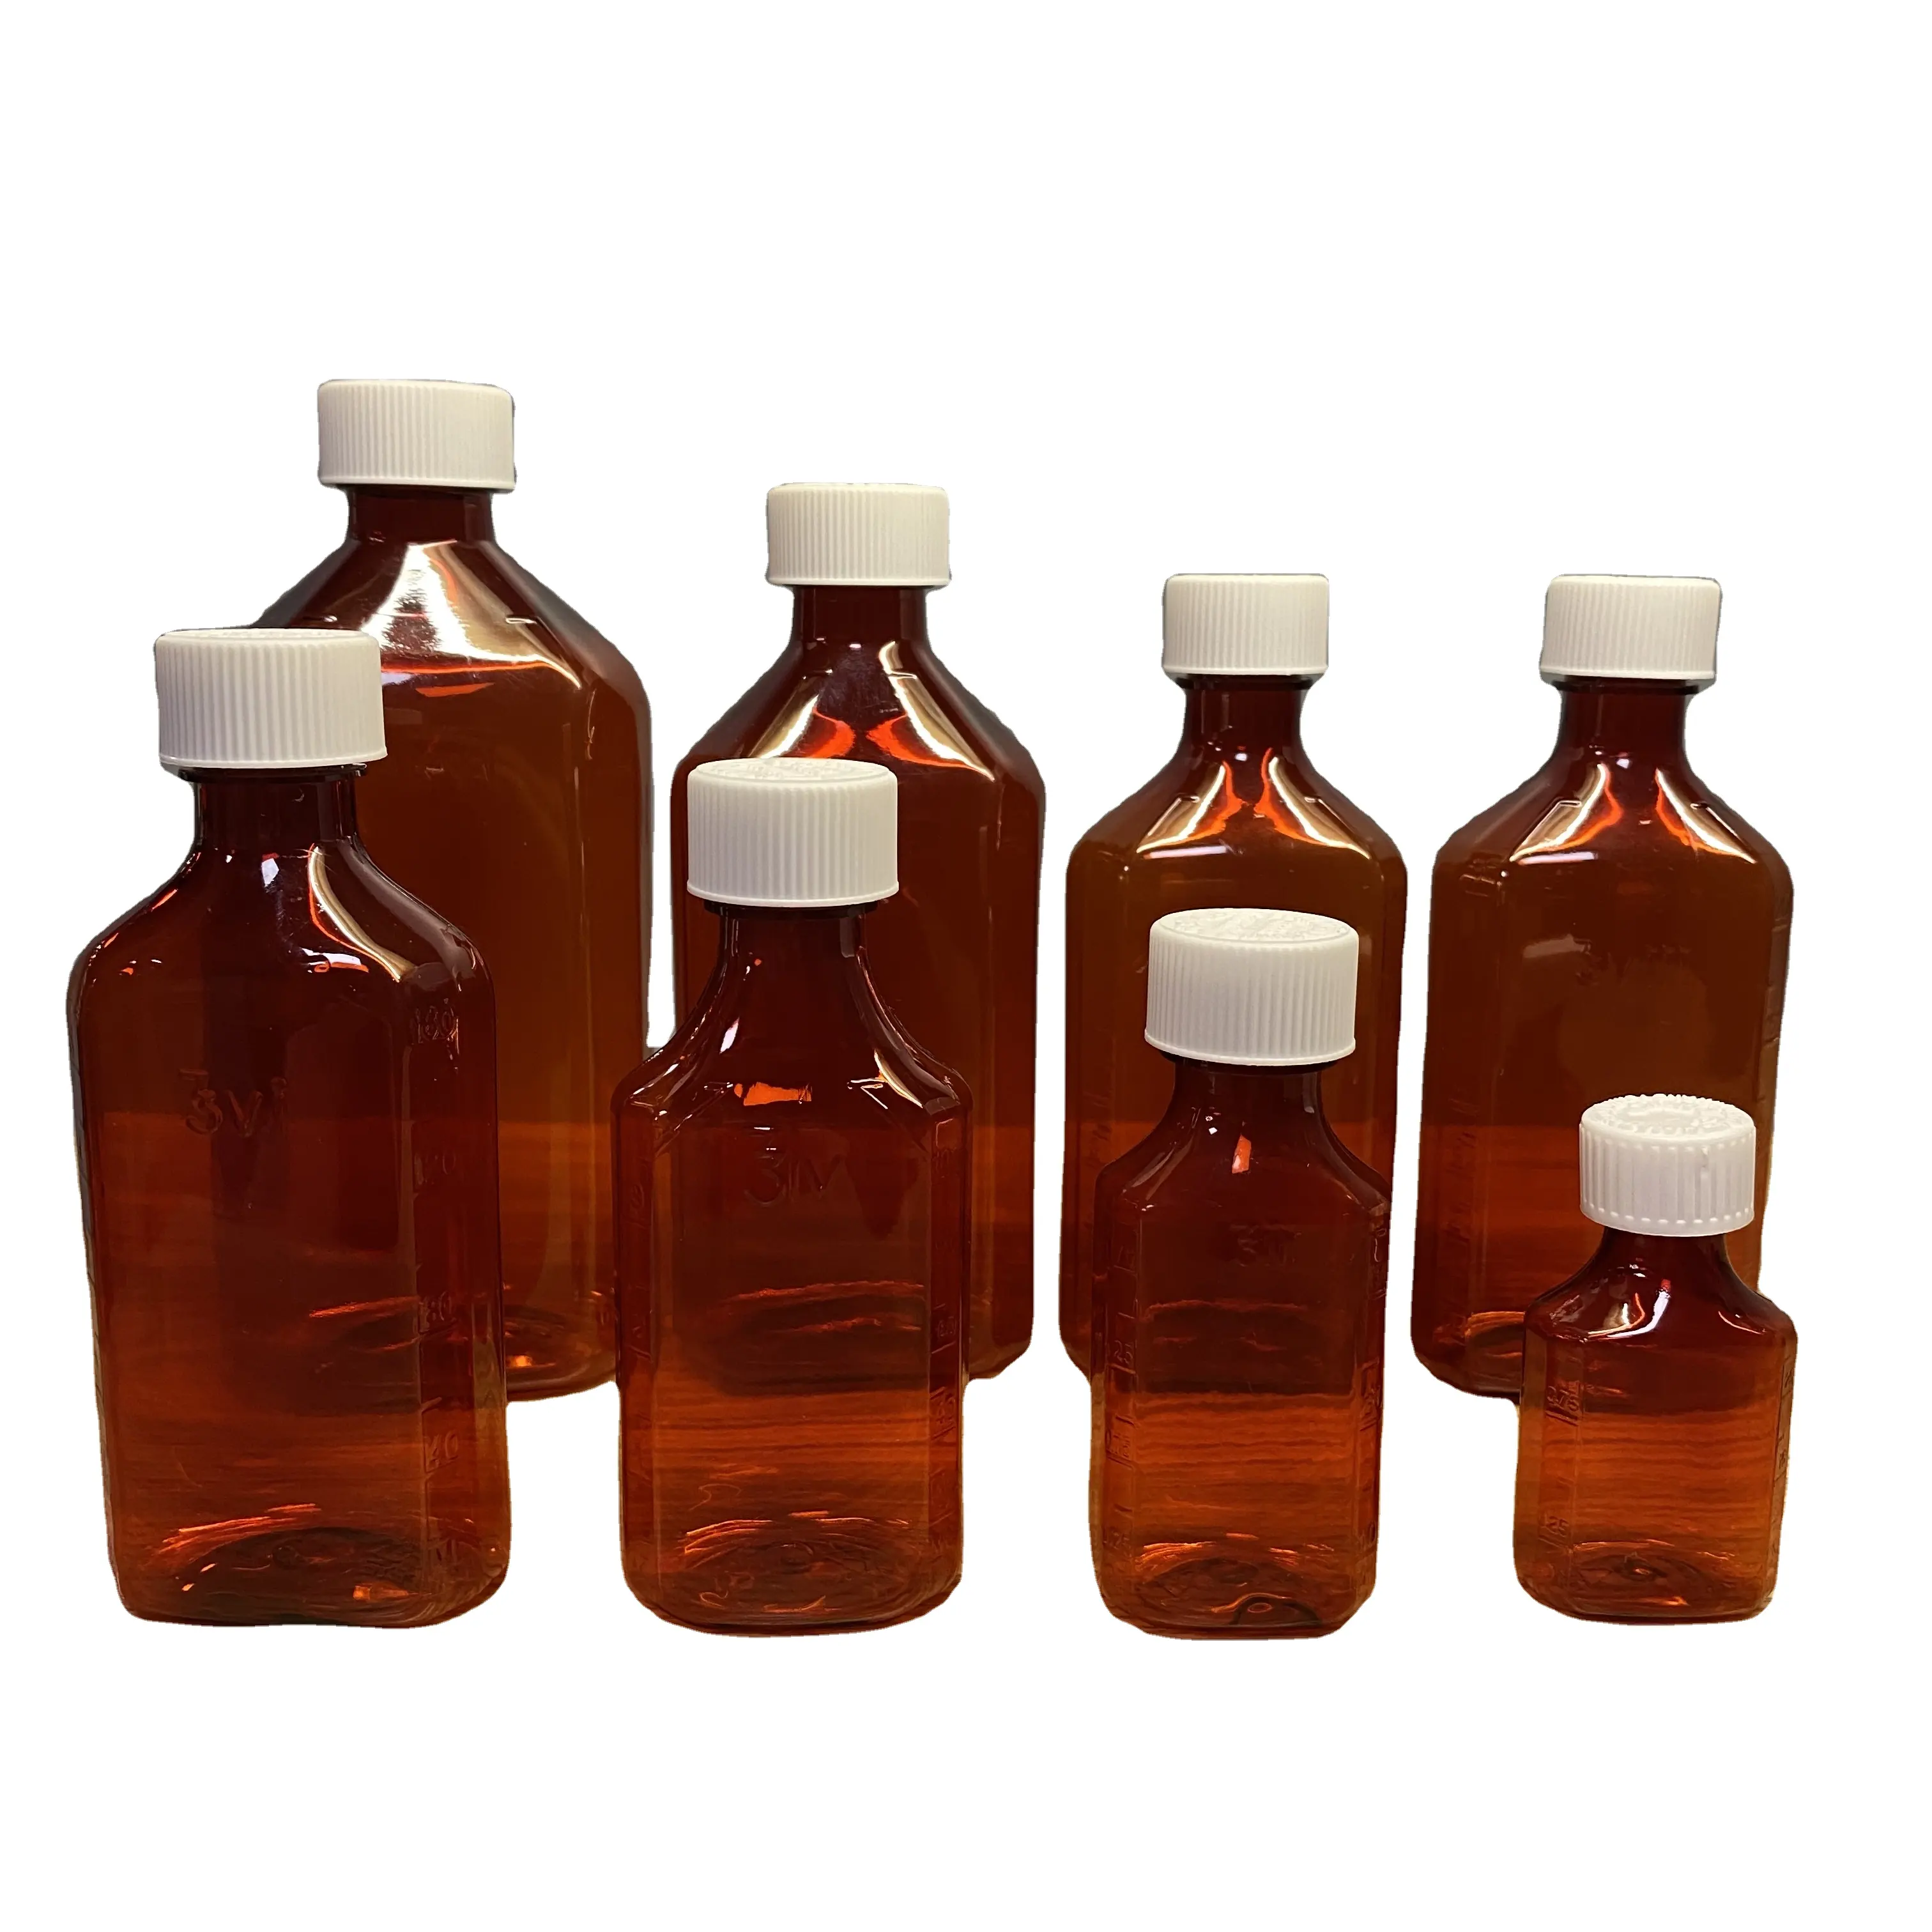 Scale Pharmacy Bottles Amber Oval RX Medicine Liquid Bottles with CR cap